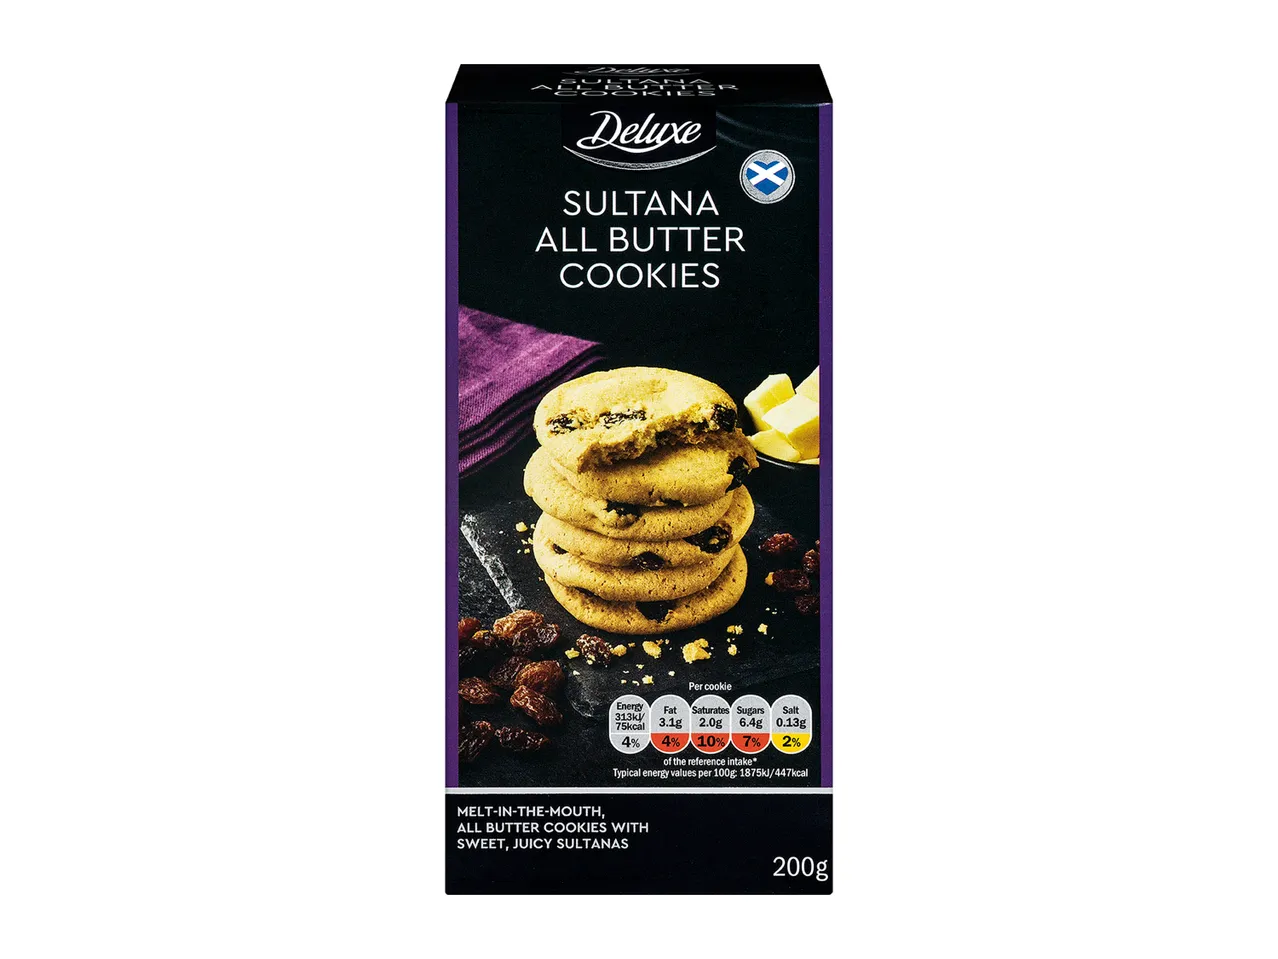 Go to full screen view: Deluxe All Butter Sultana Cookies - Image 2